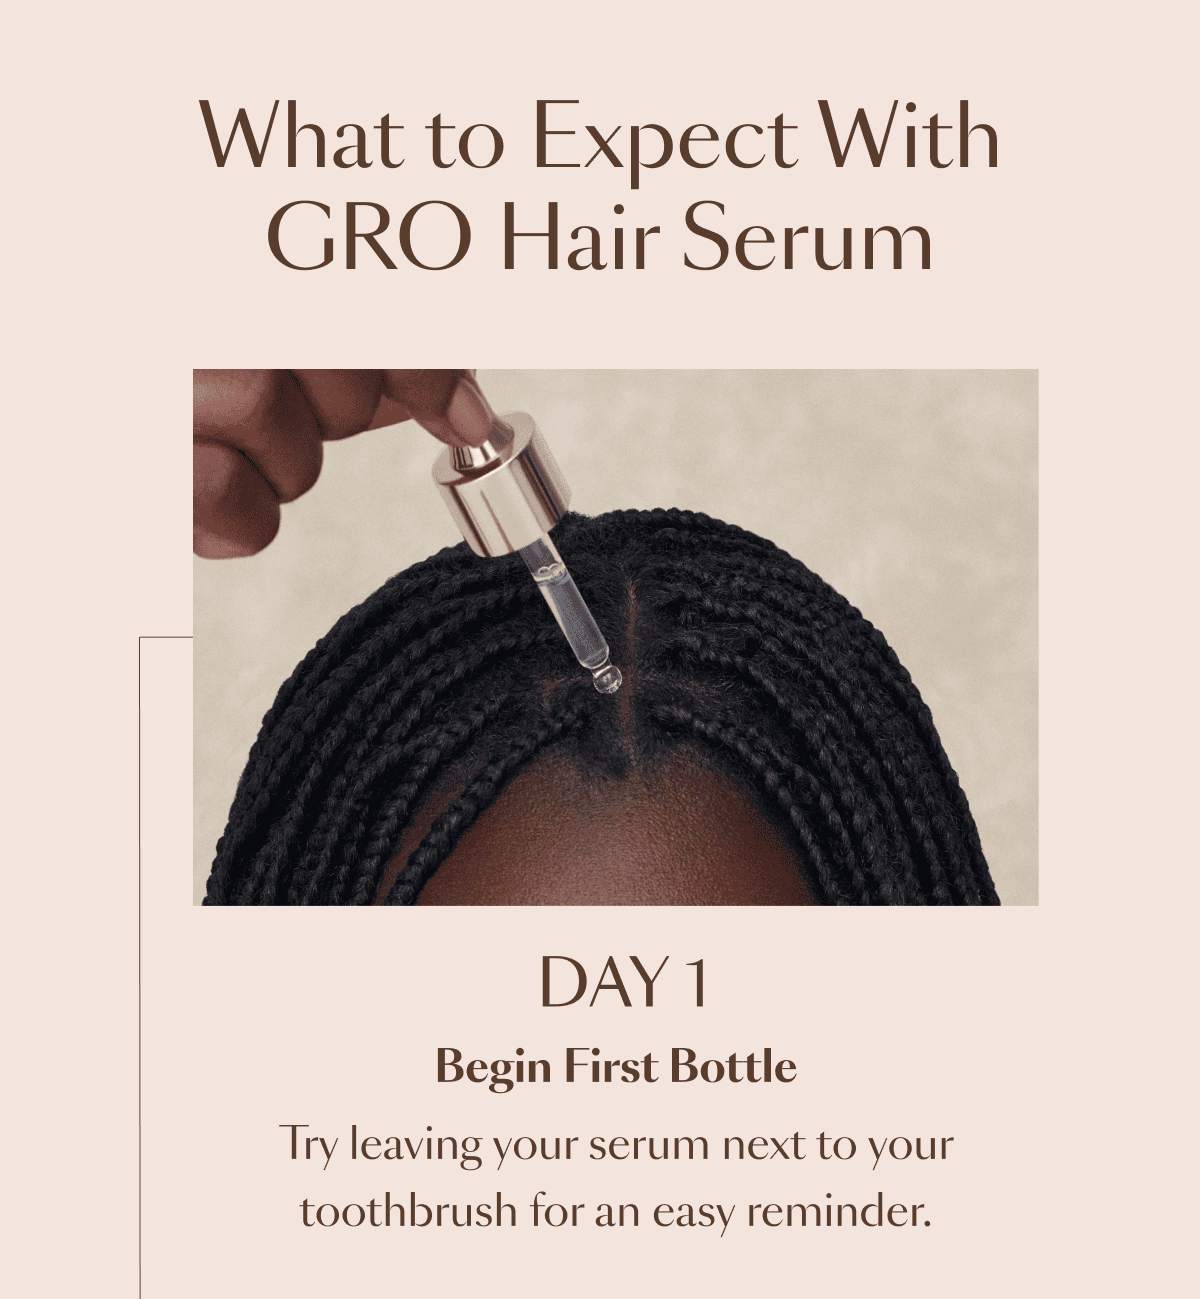 What to expect with GRO Hair Serum